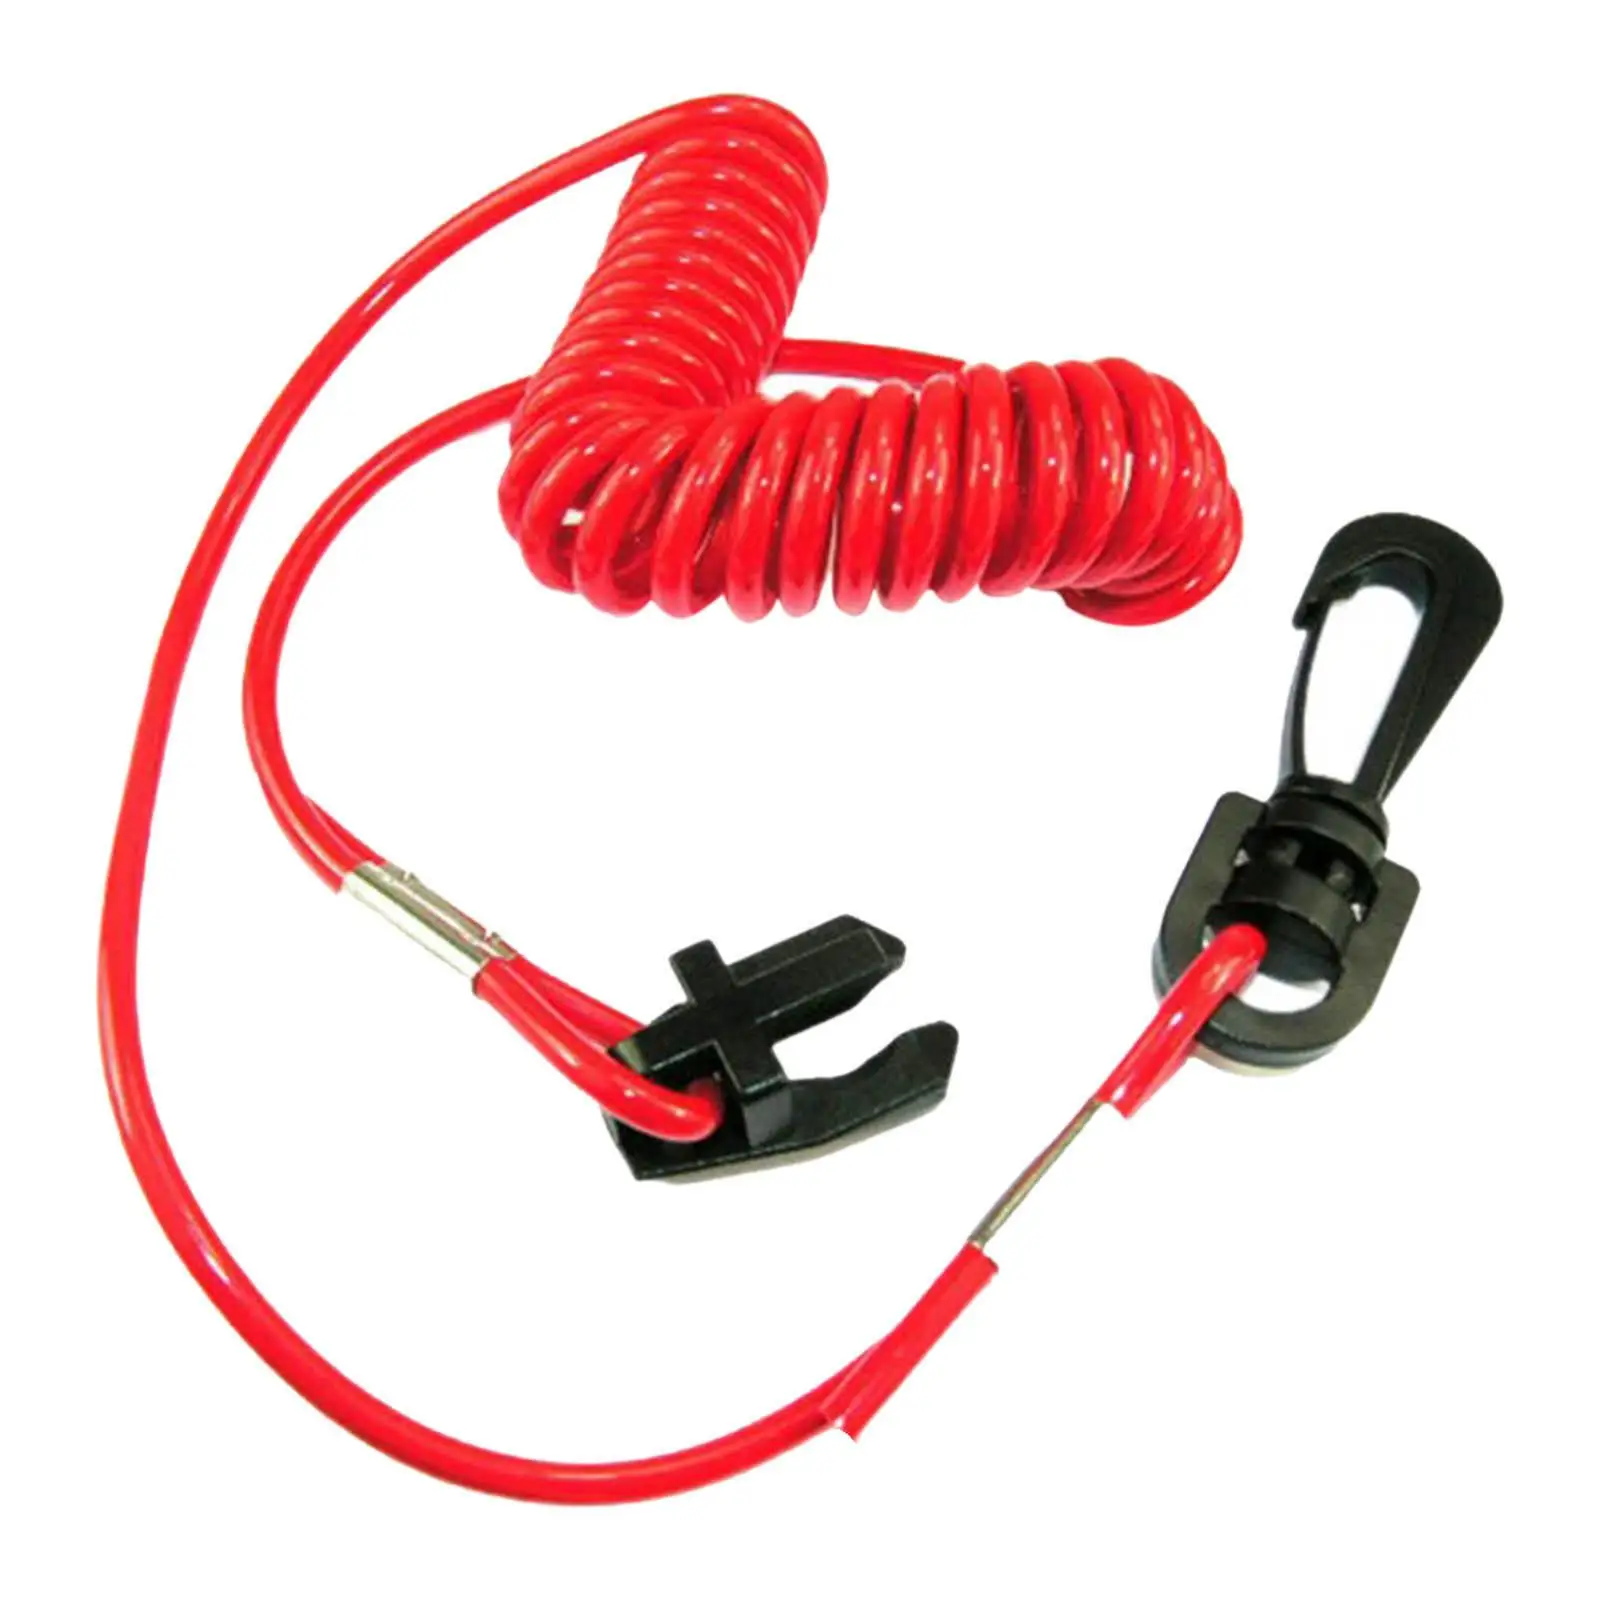 Outboard Engine Motor Safety Kill Stop Switch Lanyard, Red Cord Stop Switch Marine for for Evinrude Yacht Professional